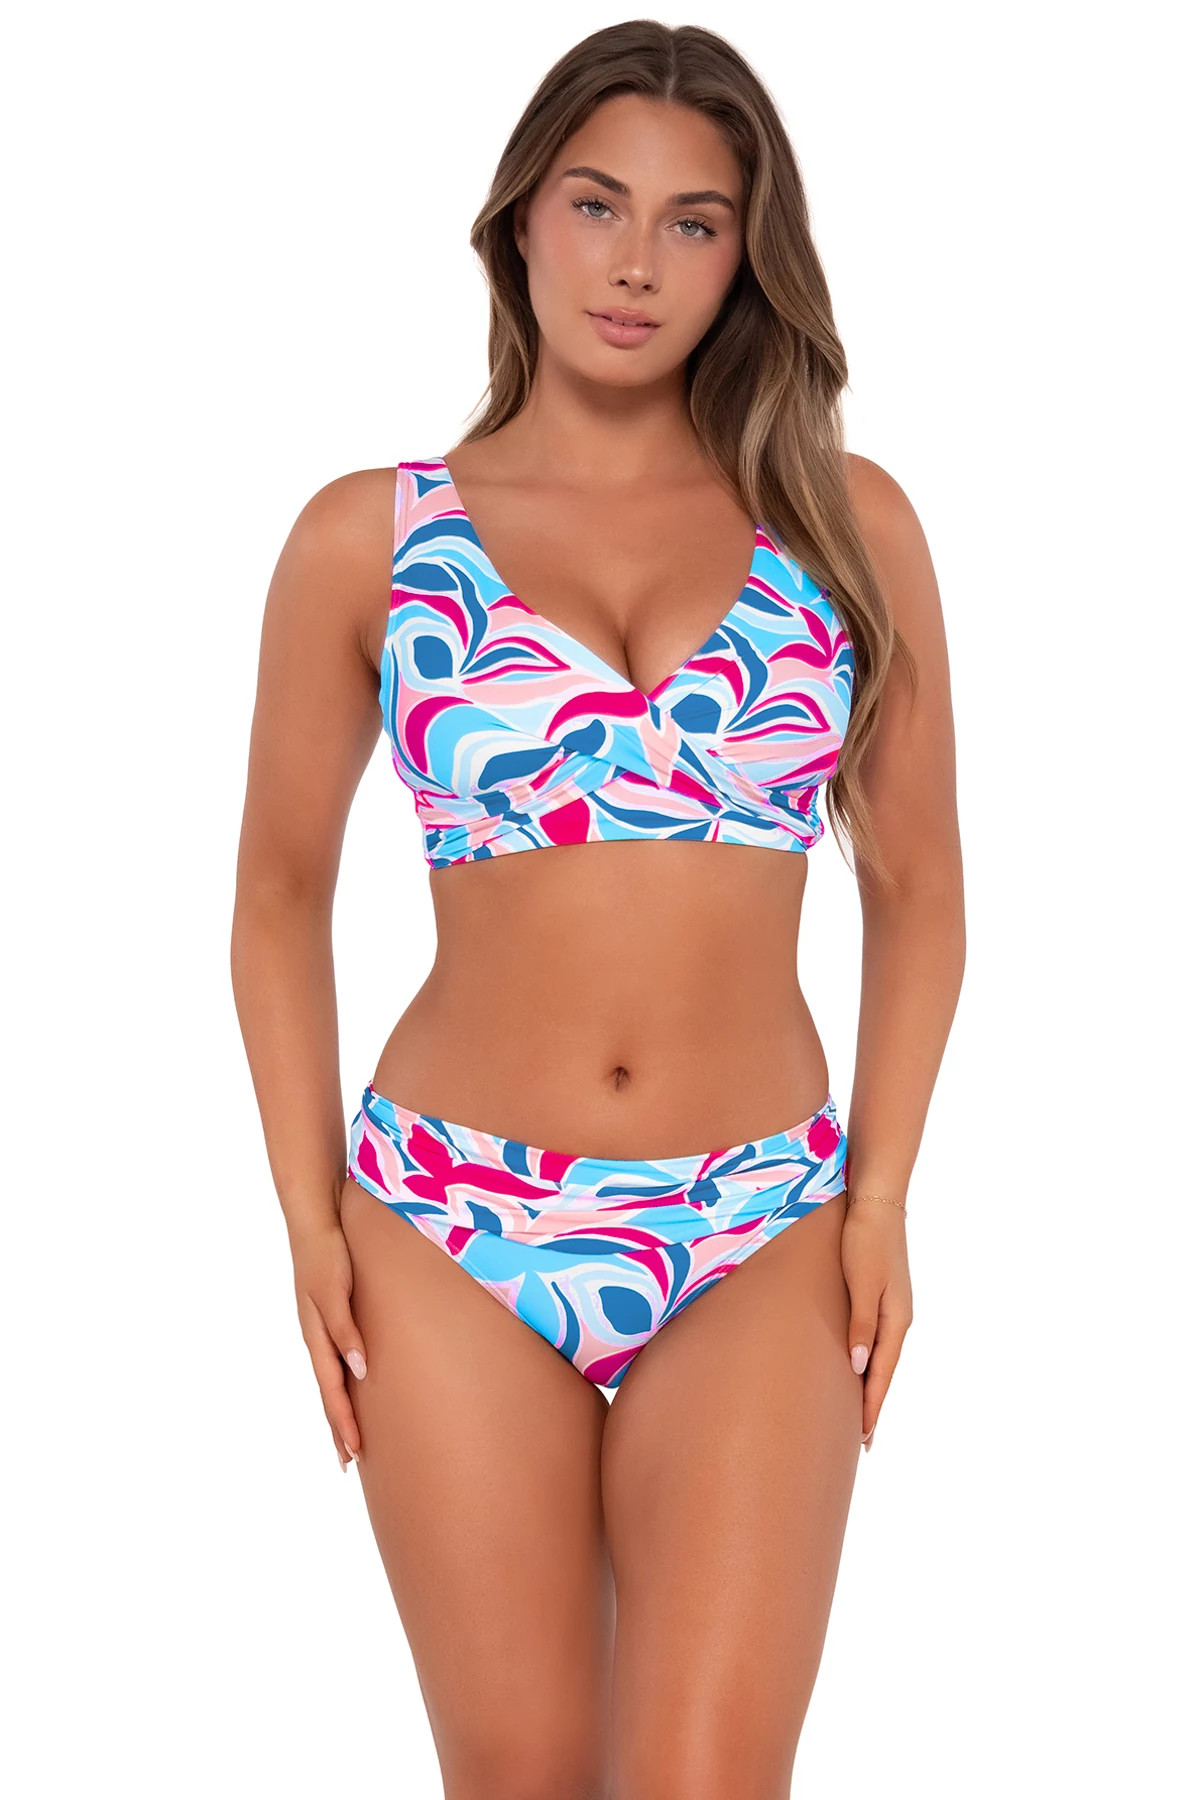 MAKING WAVES Elsie Underwire Bikini Top (E-H Cup) image number 1